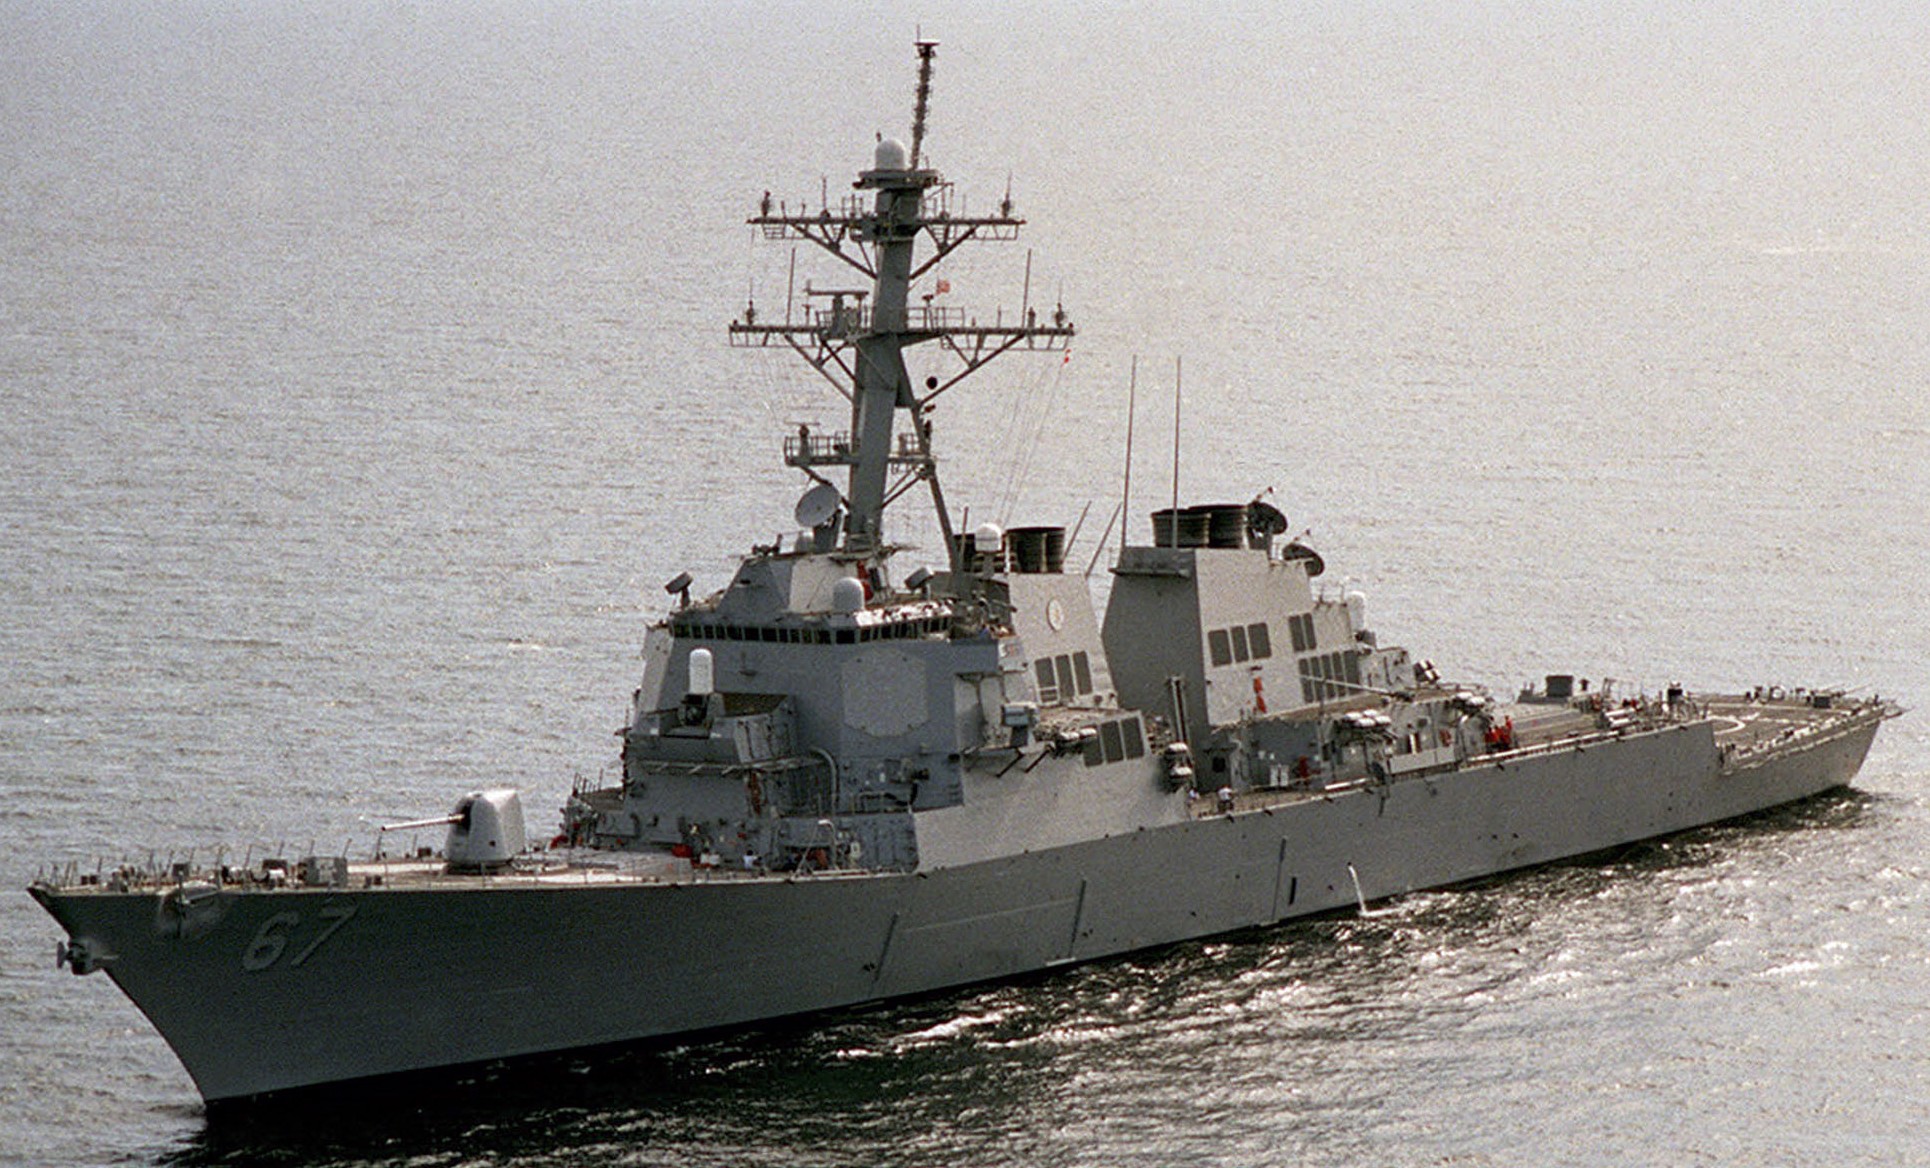 ddg-67 uss cole guided missile destroyer arleigh burke class navy aegis 52 persian gulf